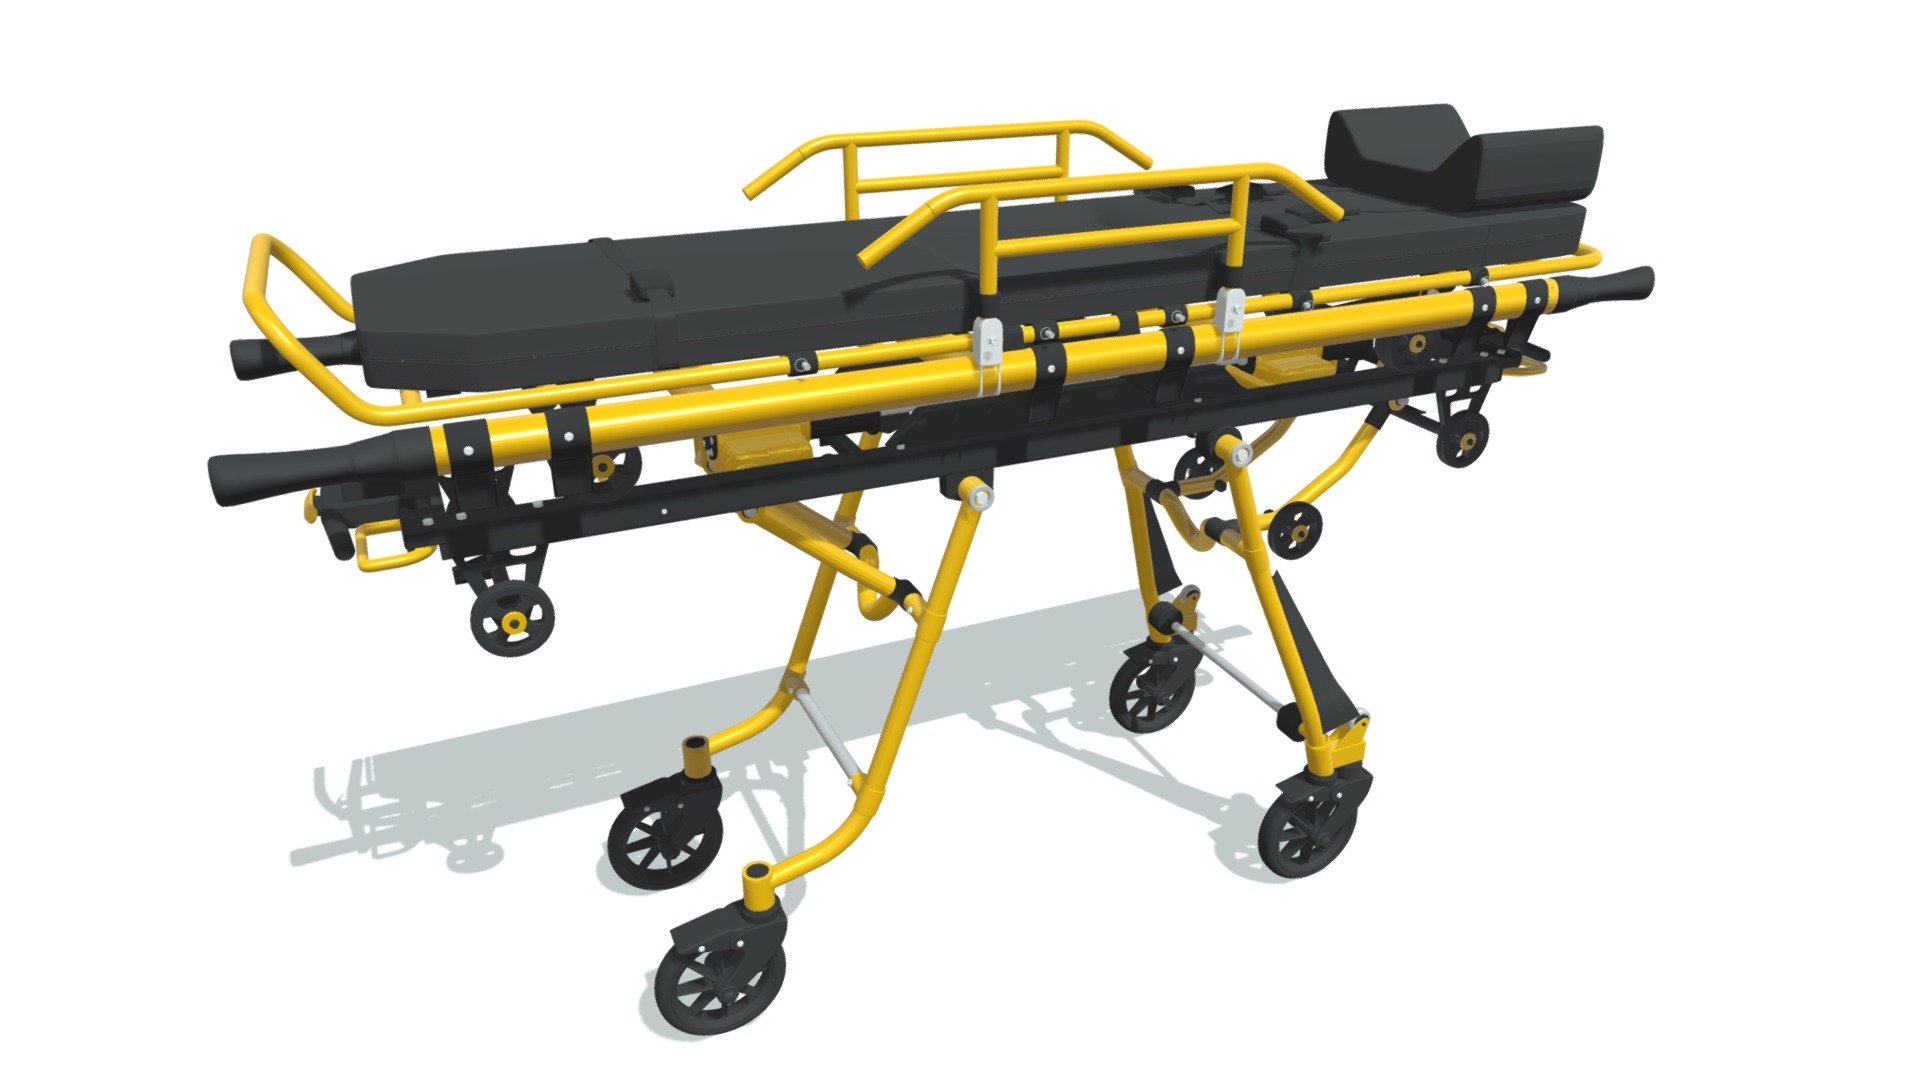 High quality 3d model of ambulance bed.
Model is high resolution and perfect for close-up detailed renders.
Colors can be easily modified.

If you need a file format that is different from what is available, please contact us 3d model